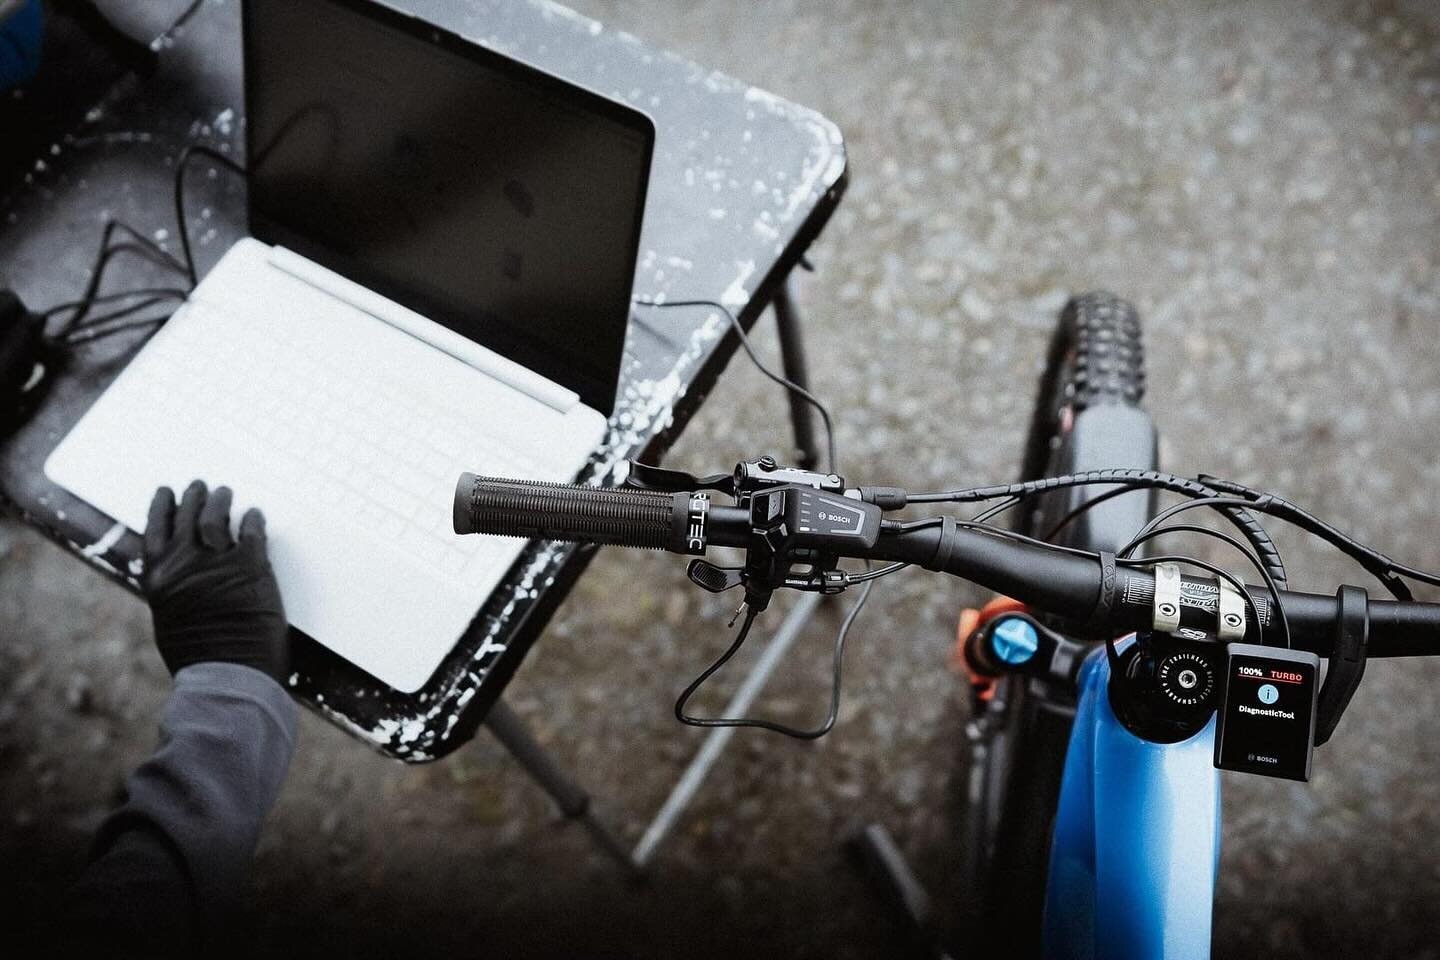 Ebike servicing, diagnostics and updates at your door 🐮🛠️ we can even sort warranty cases! Get in touch to find out more ⚡️#ebike #lostyak #bikeservice